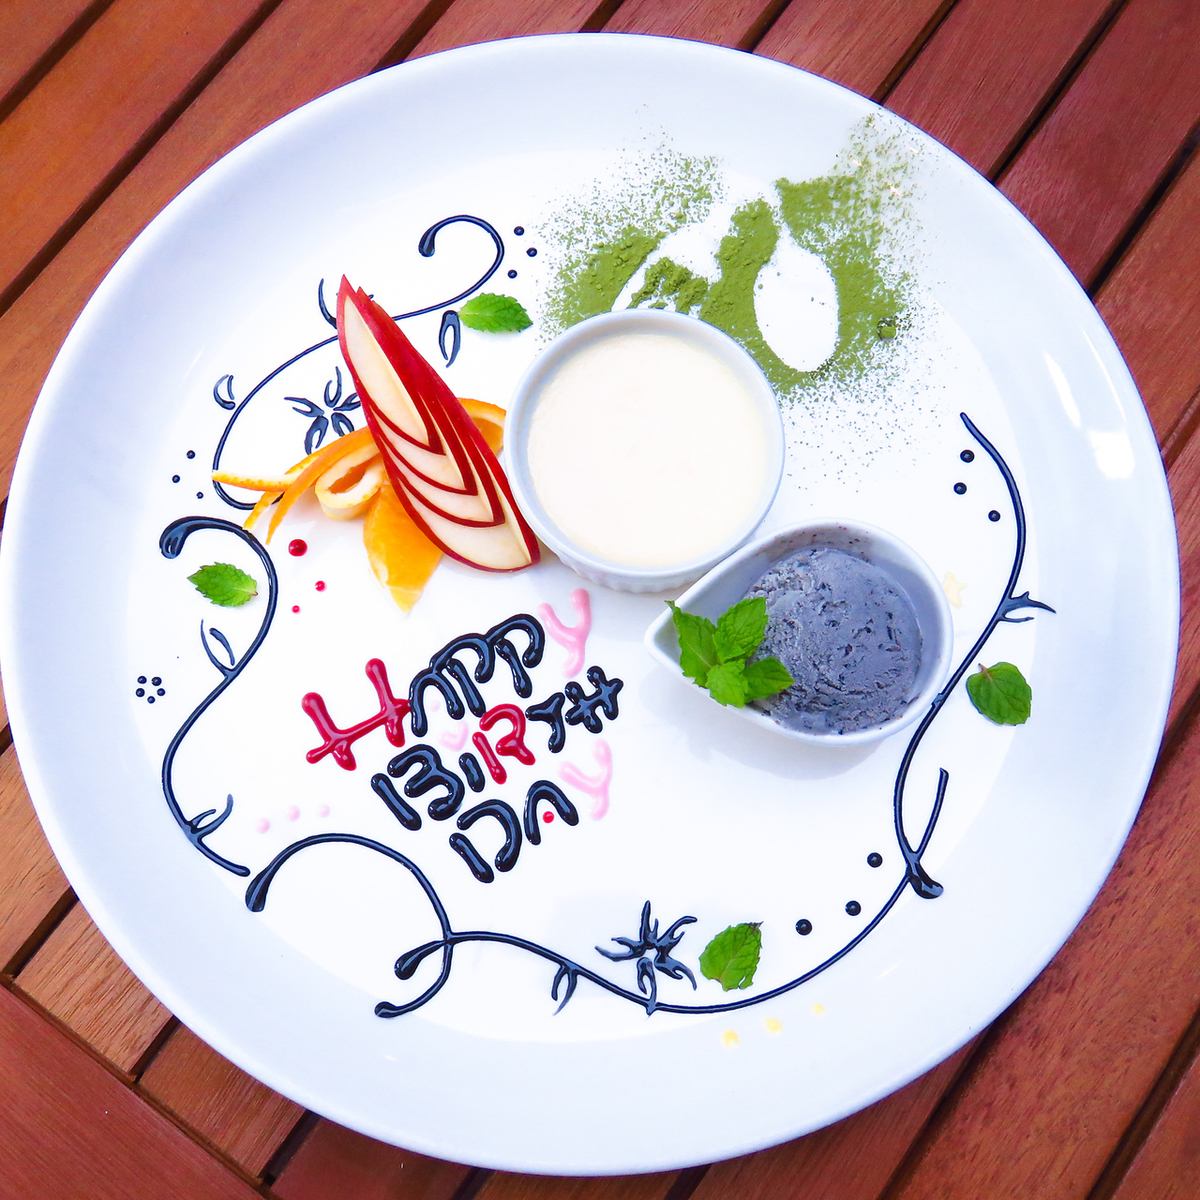 [Surprise in Aoki season] Anniversary plate is available for reservation only!